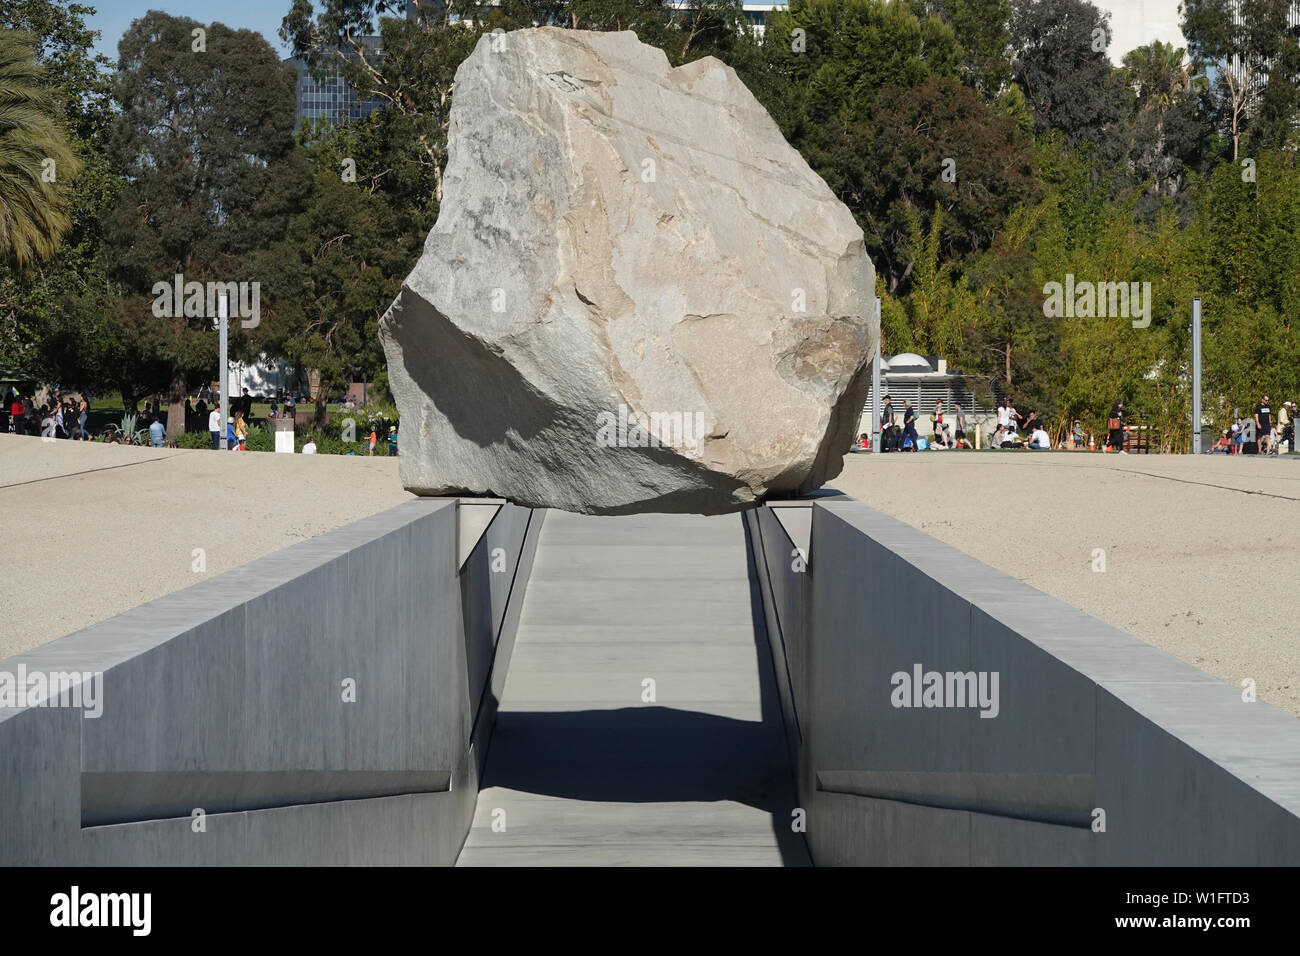 Los Angeles, CA / USA - June 28, 2019: The public art display, Levitated Mass, by Michael Heizer, is shown at the Los Angeles County Museum of Art. Stock Photo